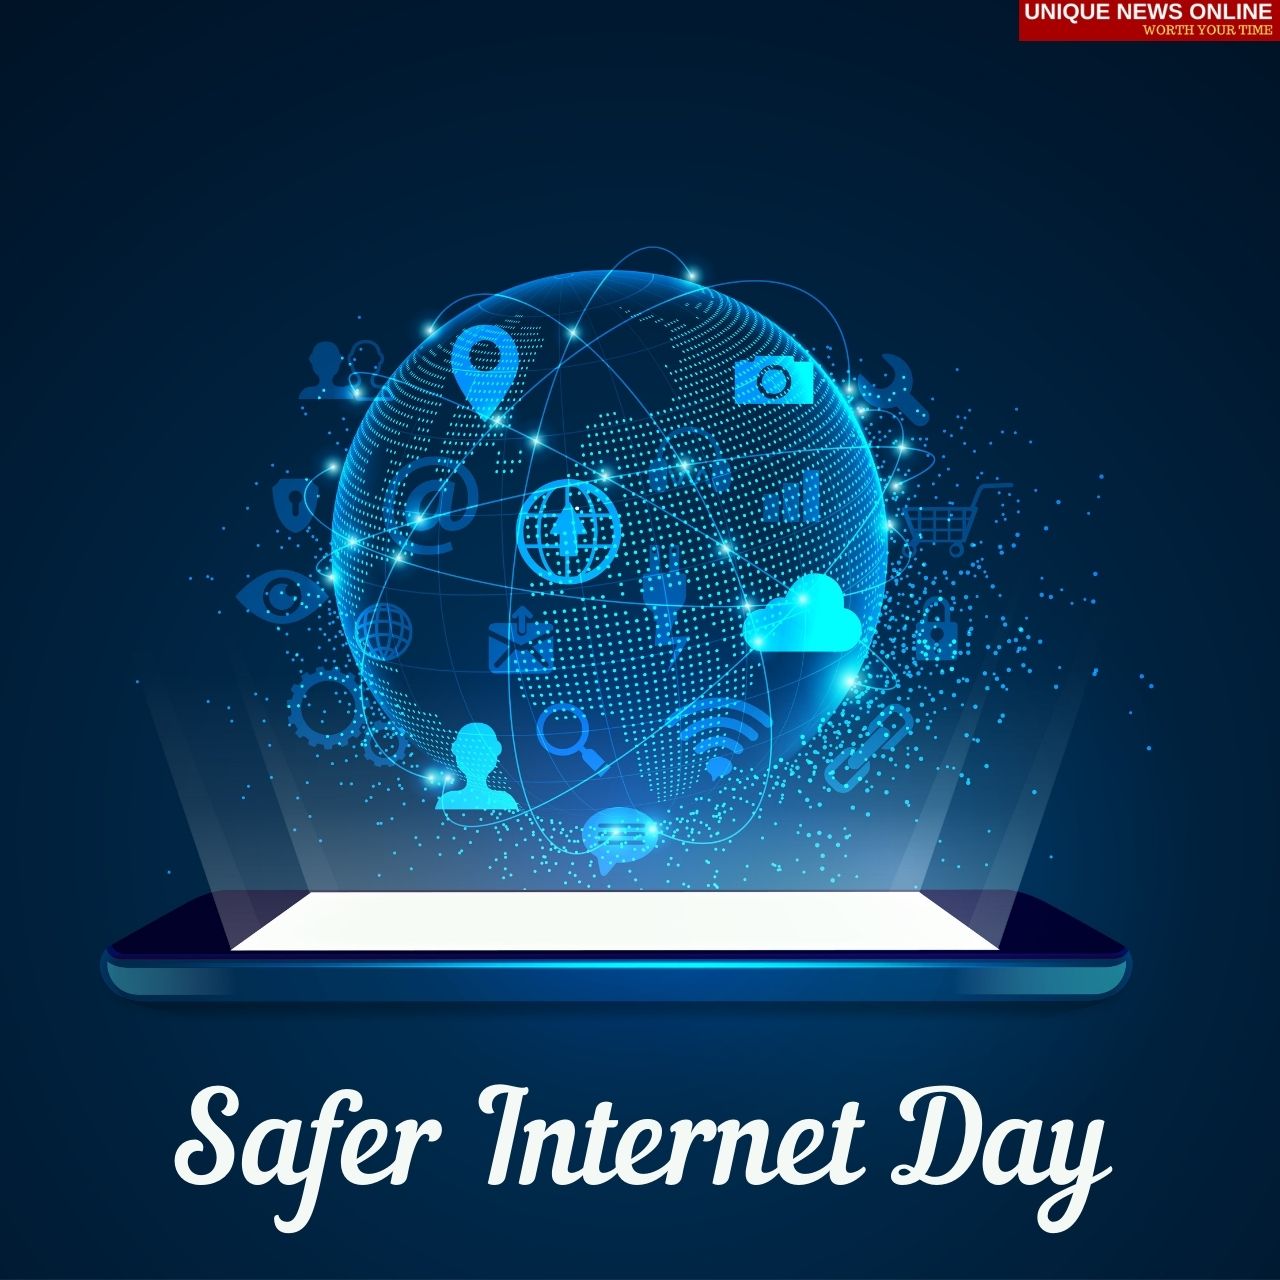 Safer Internet Day 2022 Theme, Quotes, Messages, HD Images, Posters, and Banners to create awareness